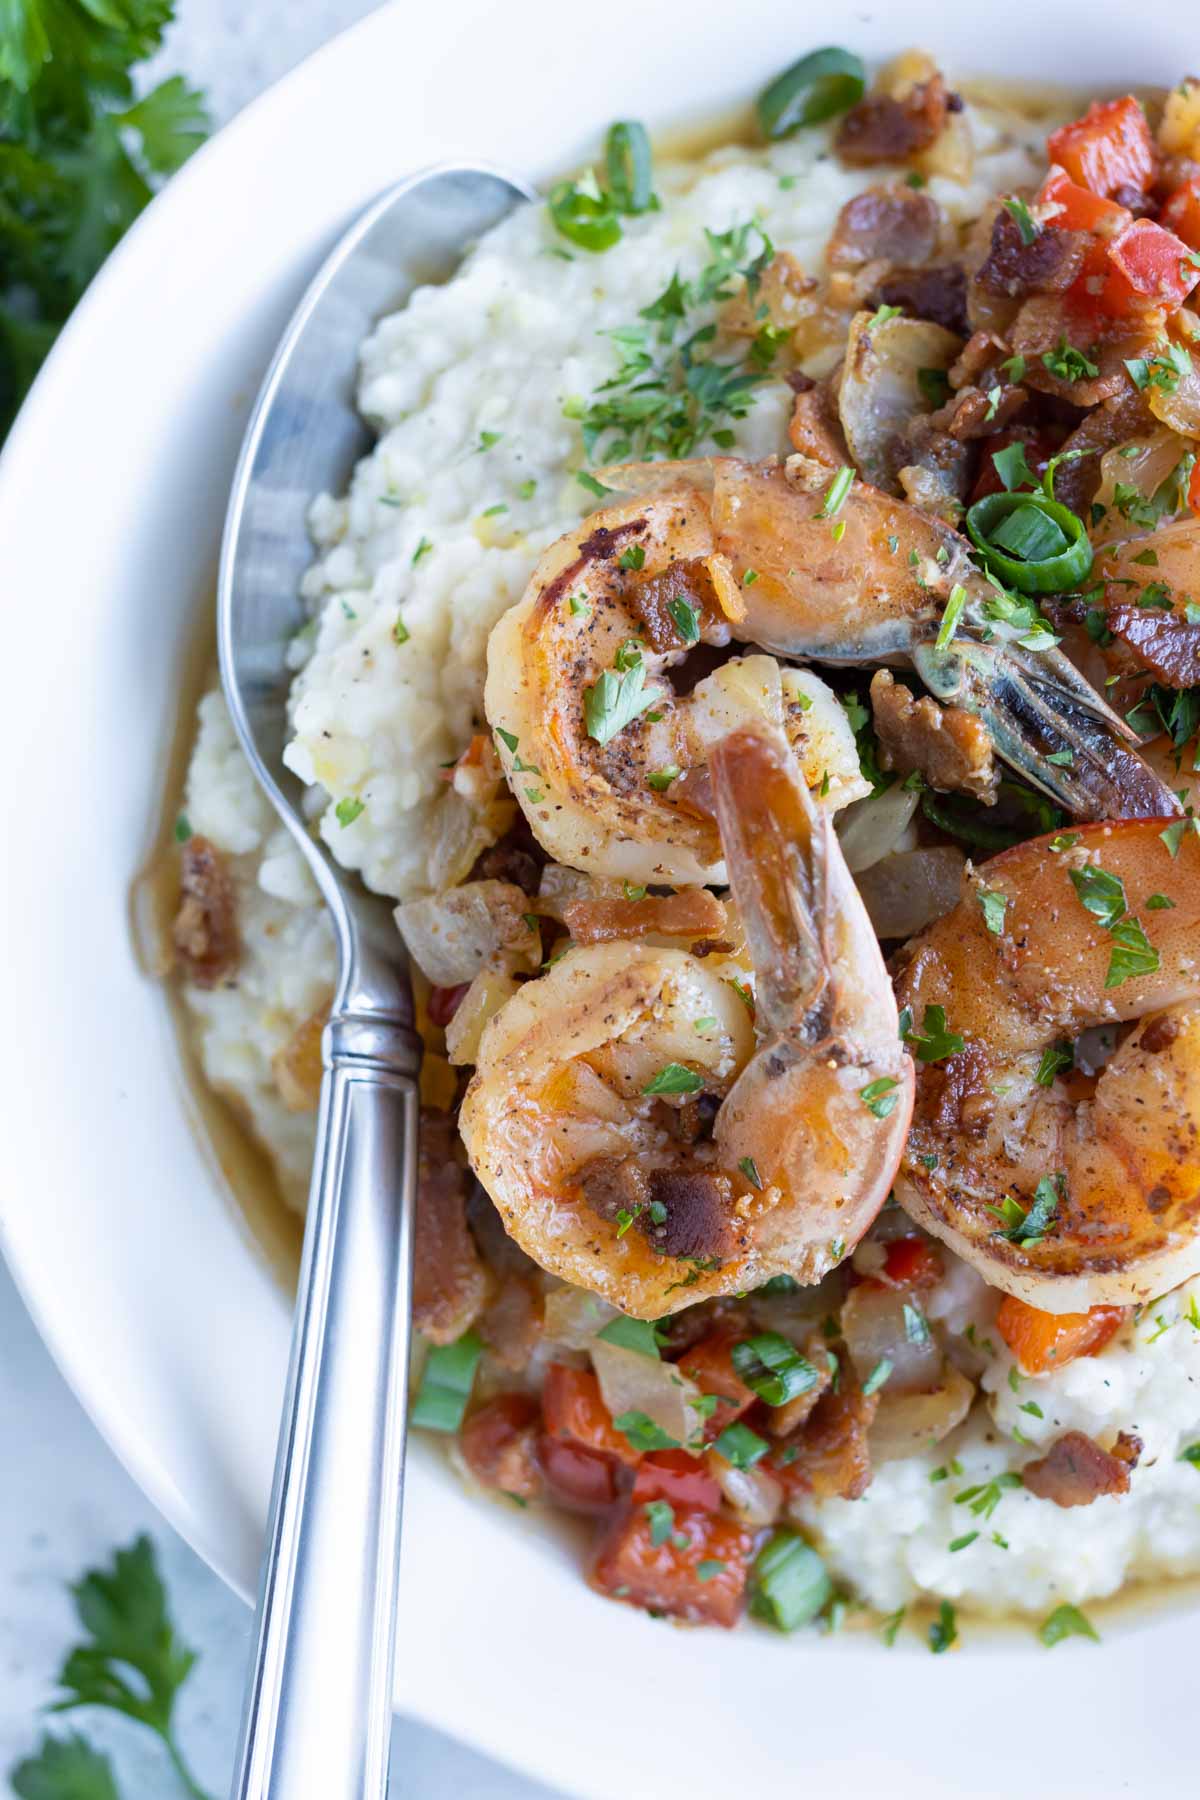 Easy Cajun shrimp and grits is eaten with a spoon from a bowl.